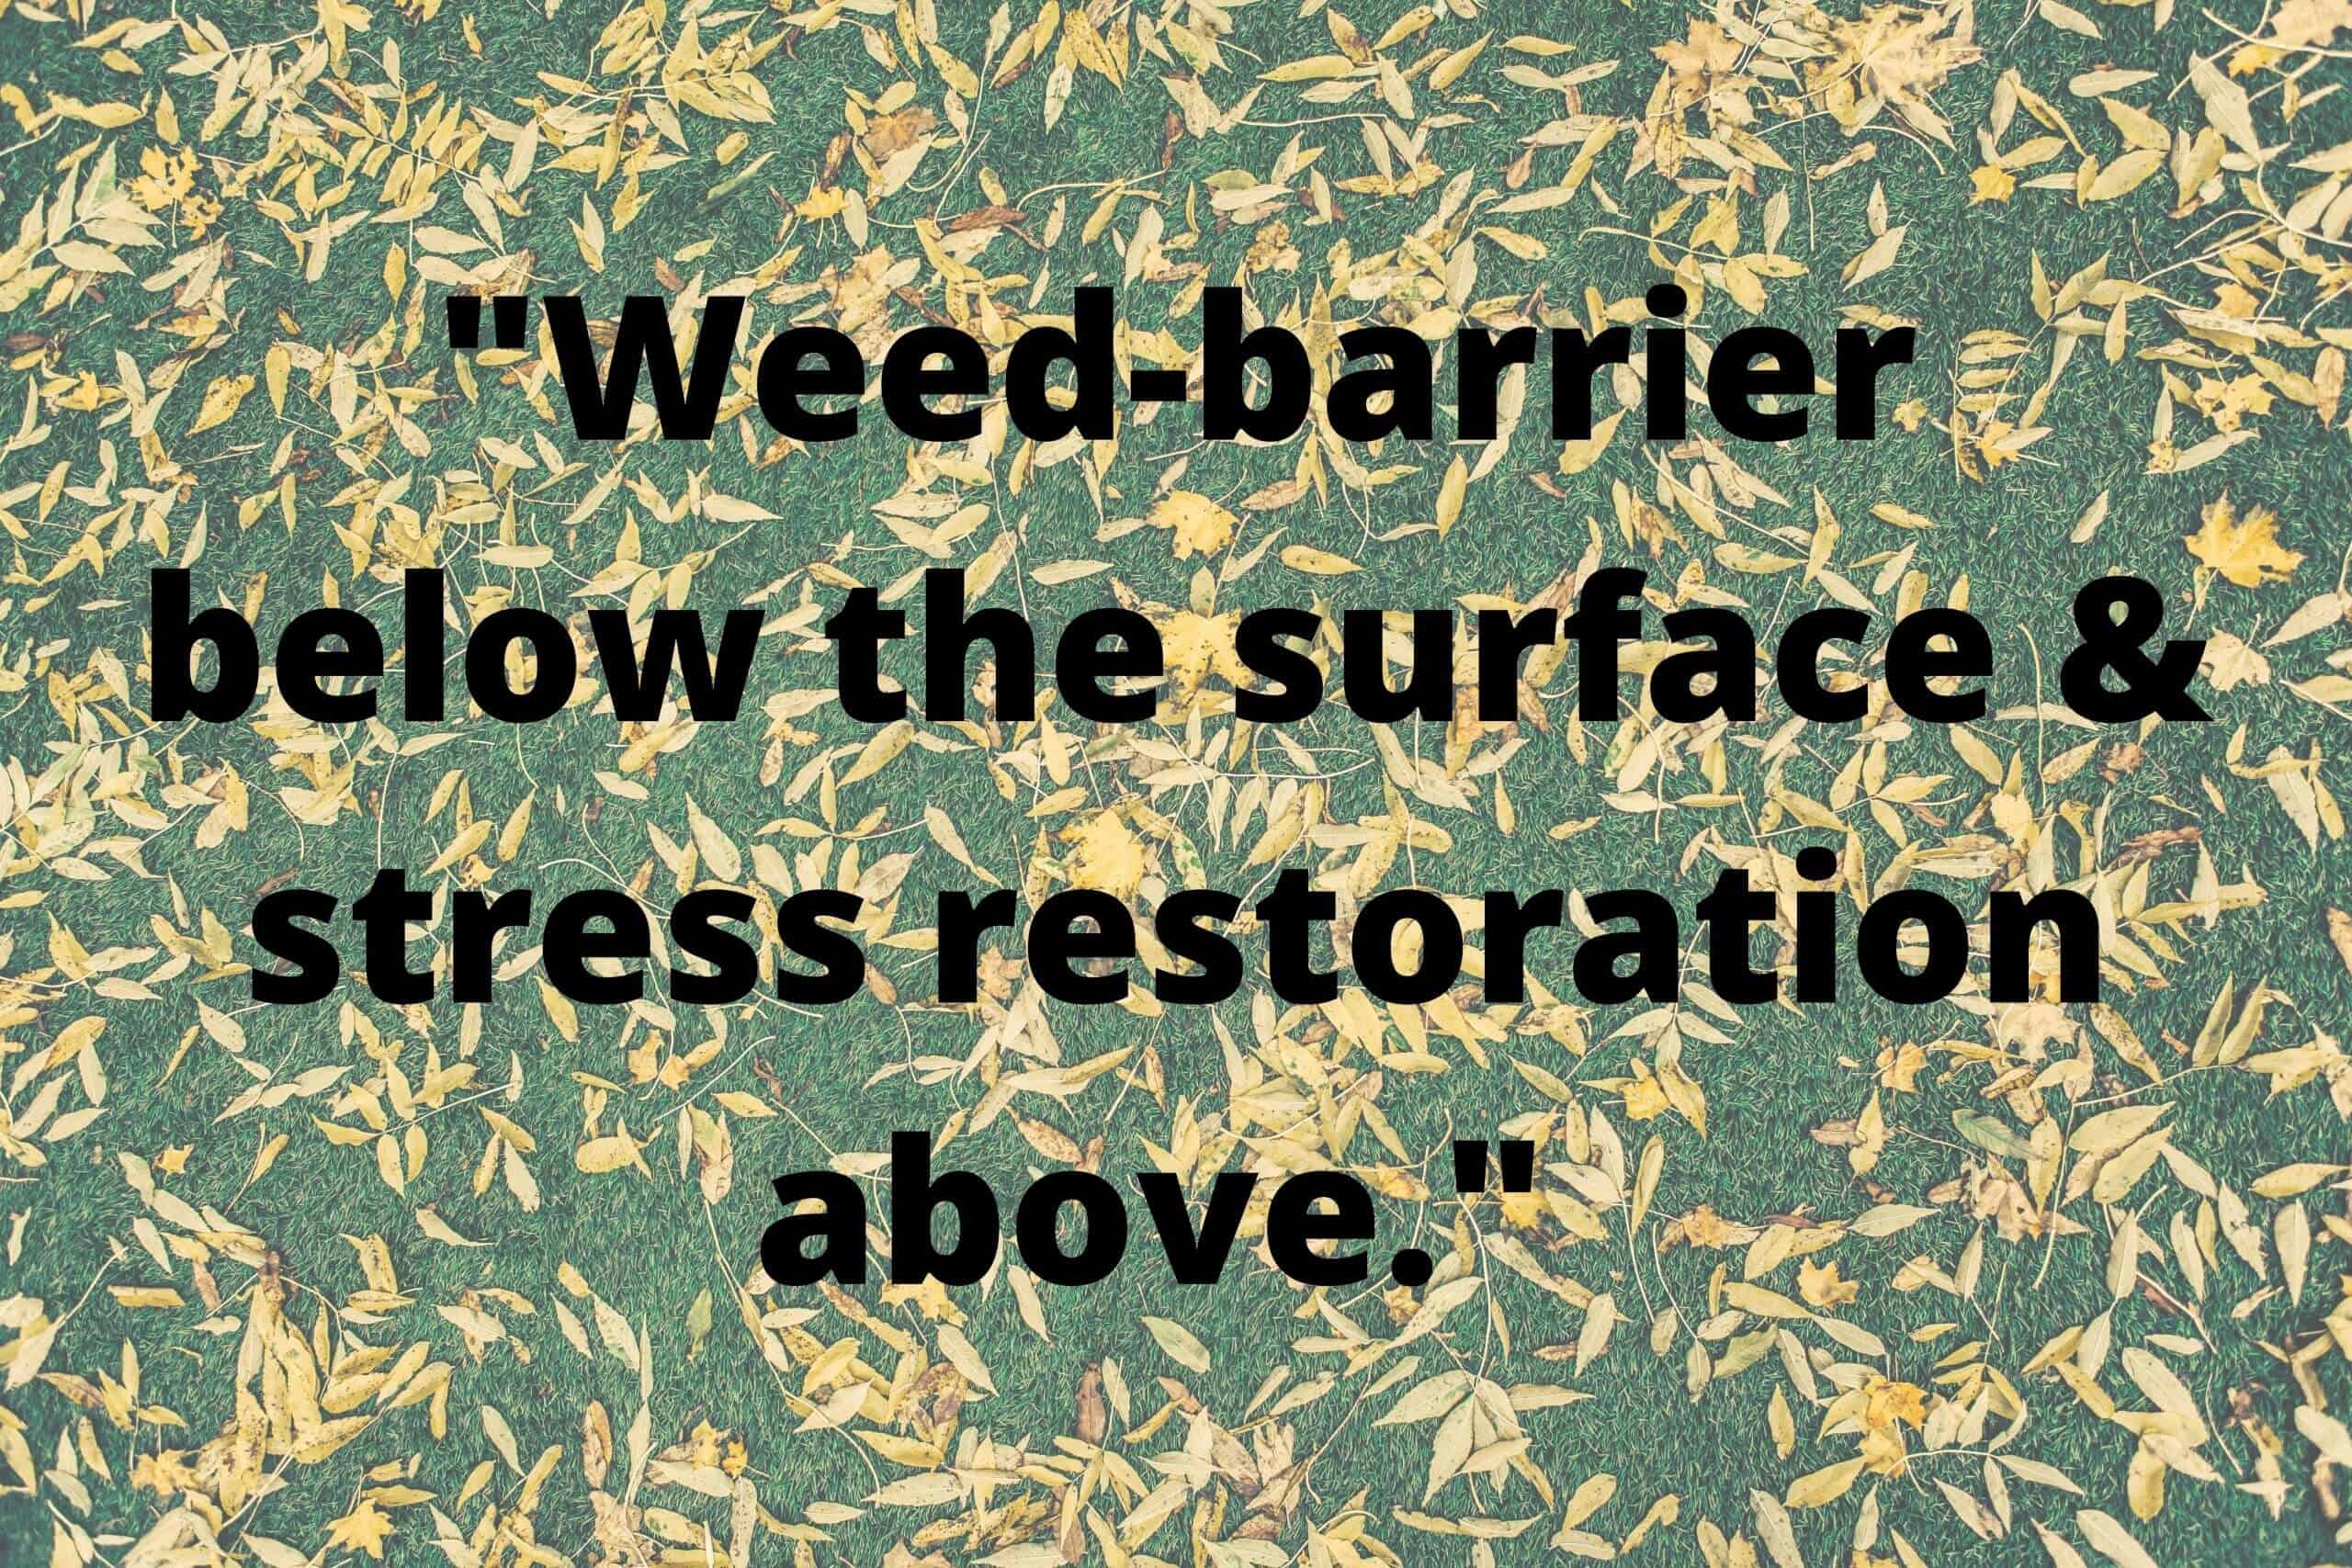 Weed Barrier and Lawn Care